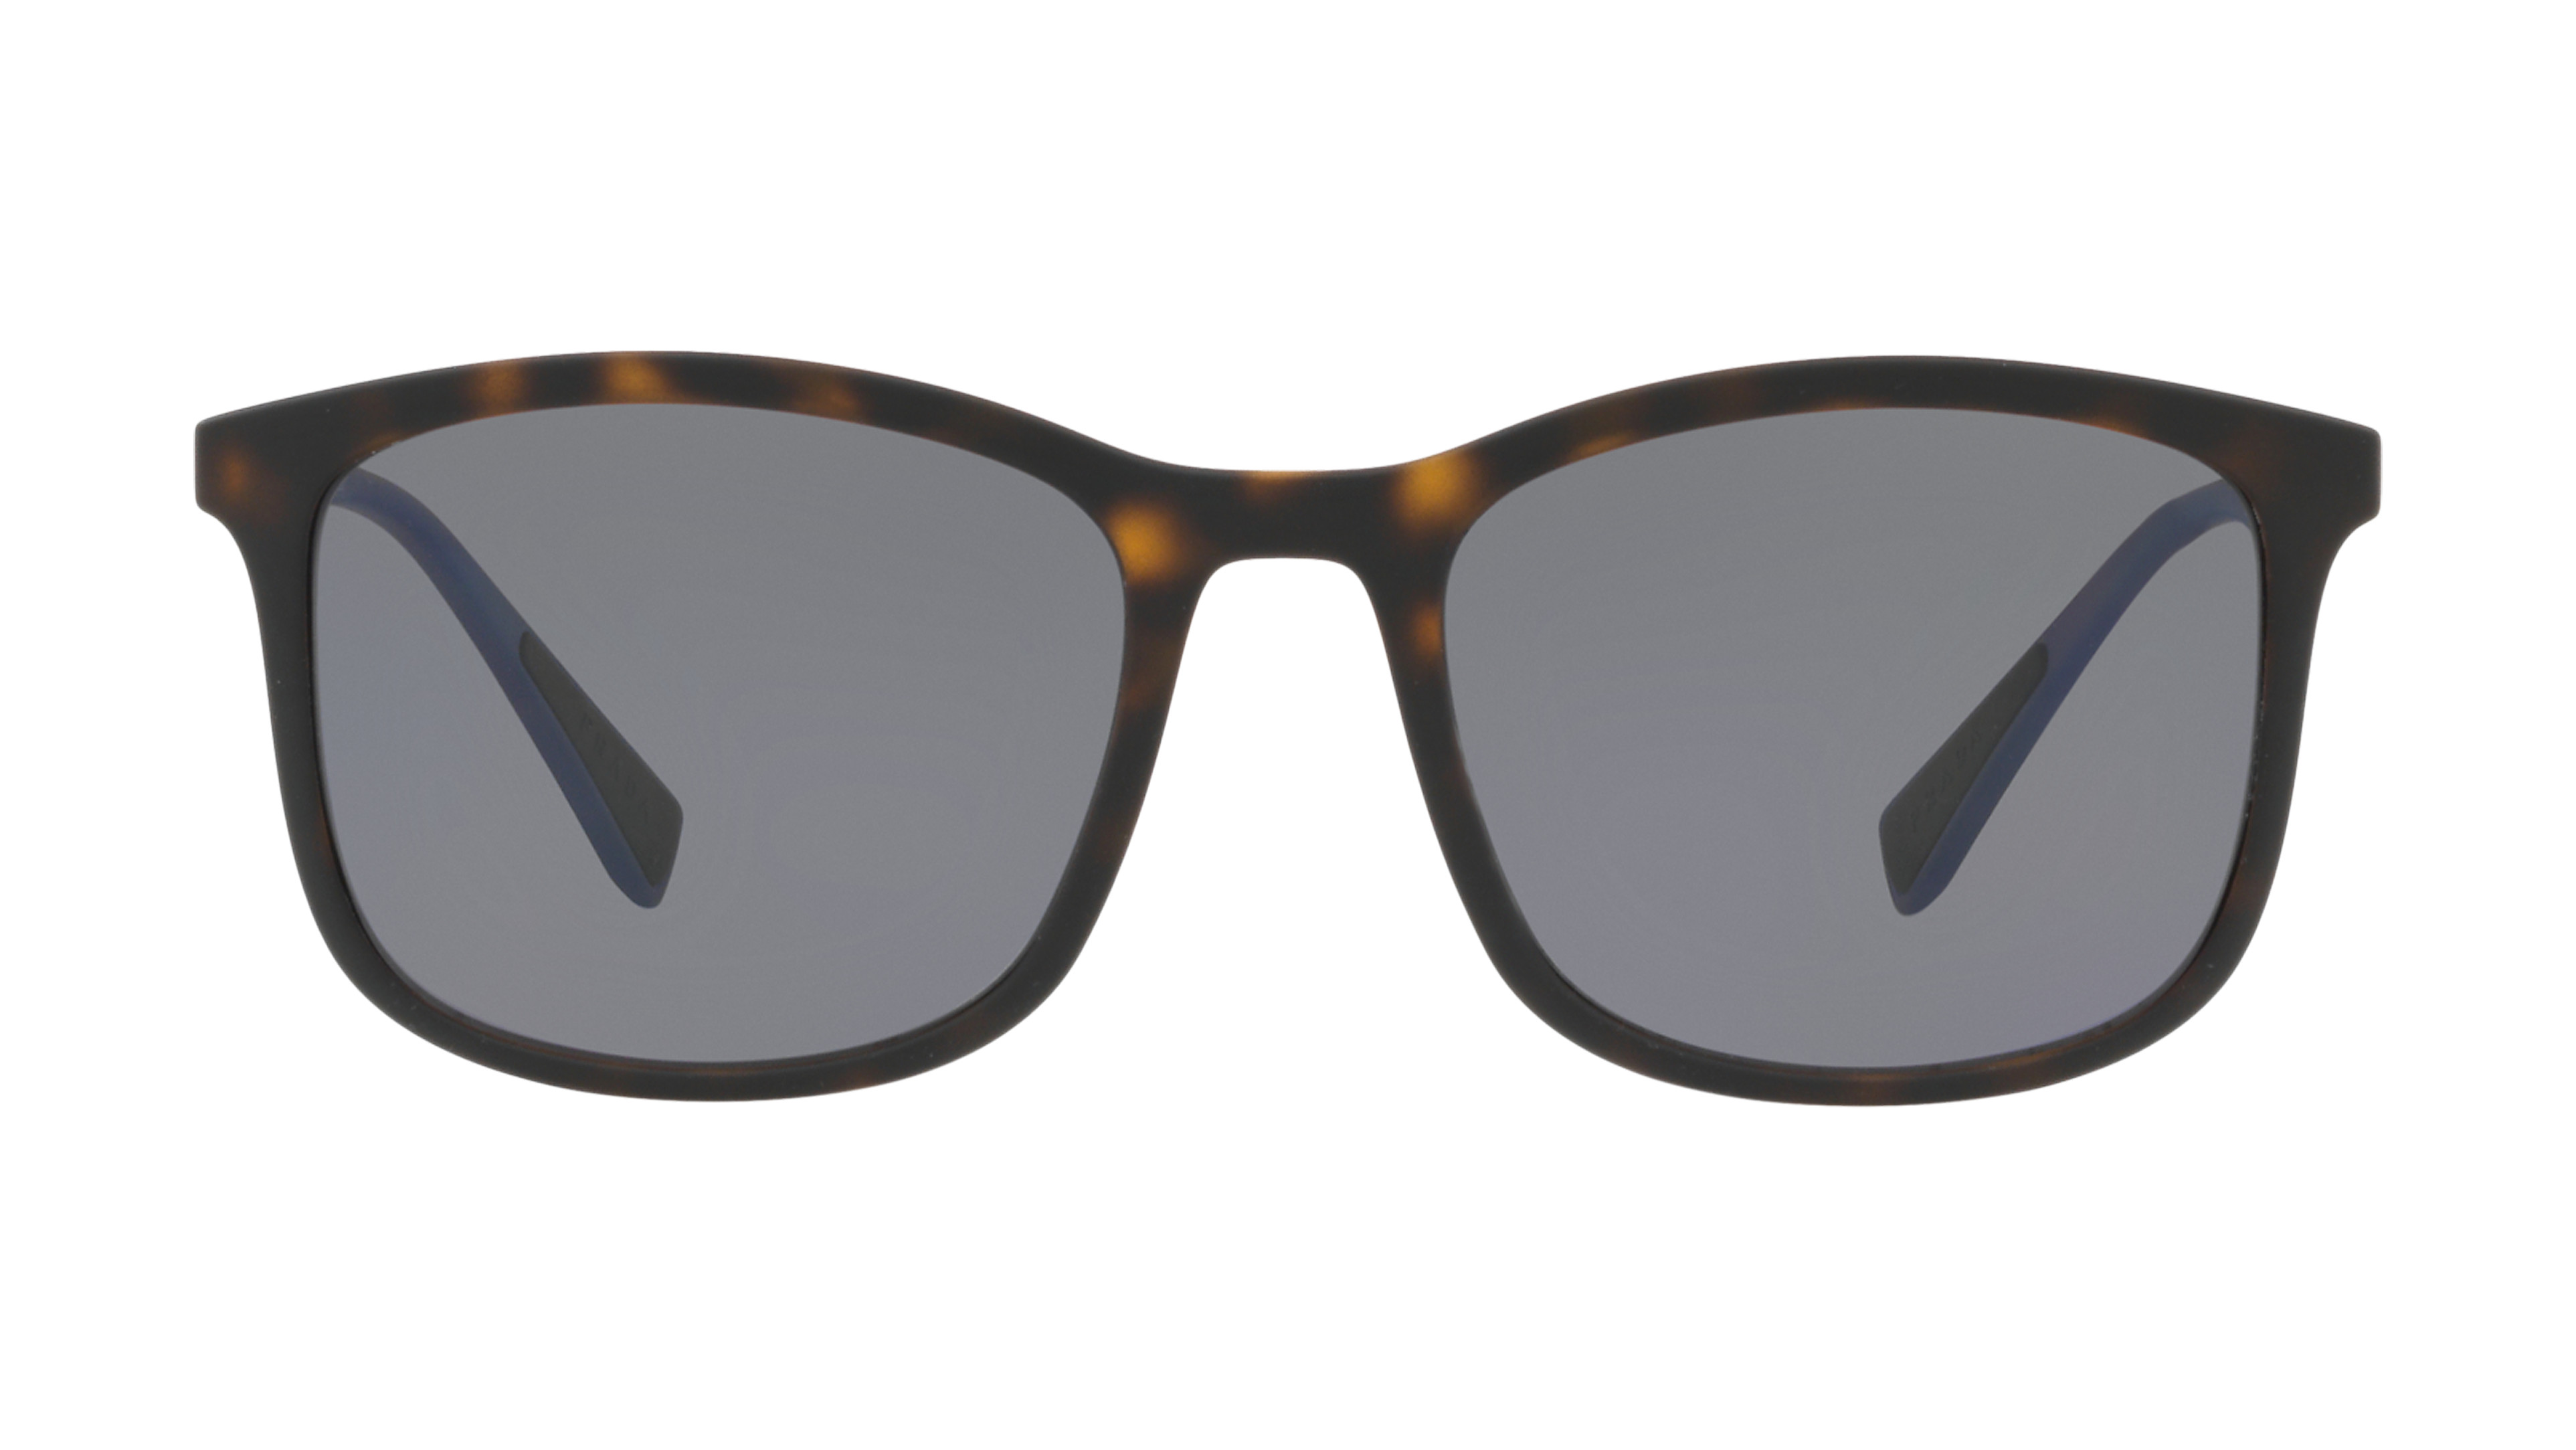 [products.image.front] Prada Linea Rossa LIFESTYLE 0PS 01TS U61144 Sonnenbrille